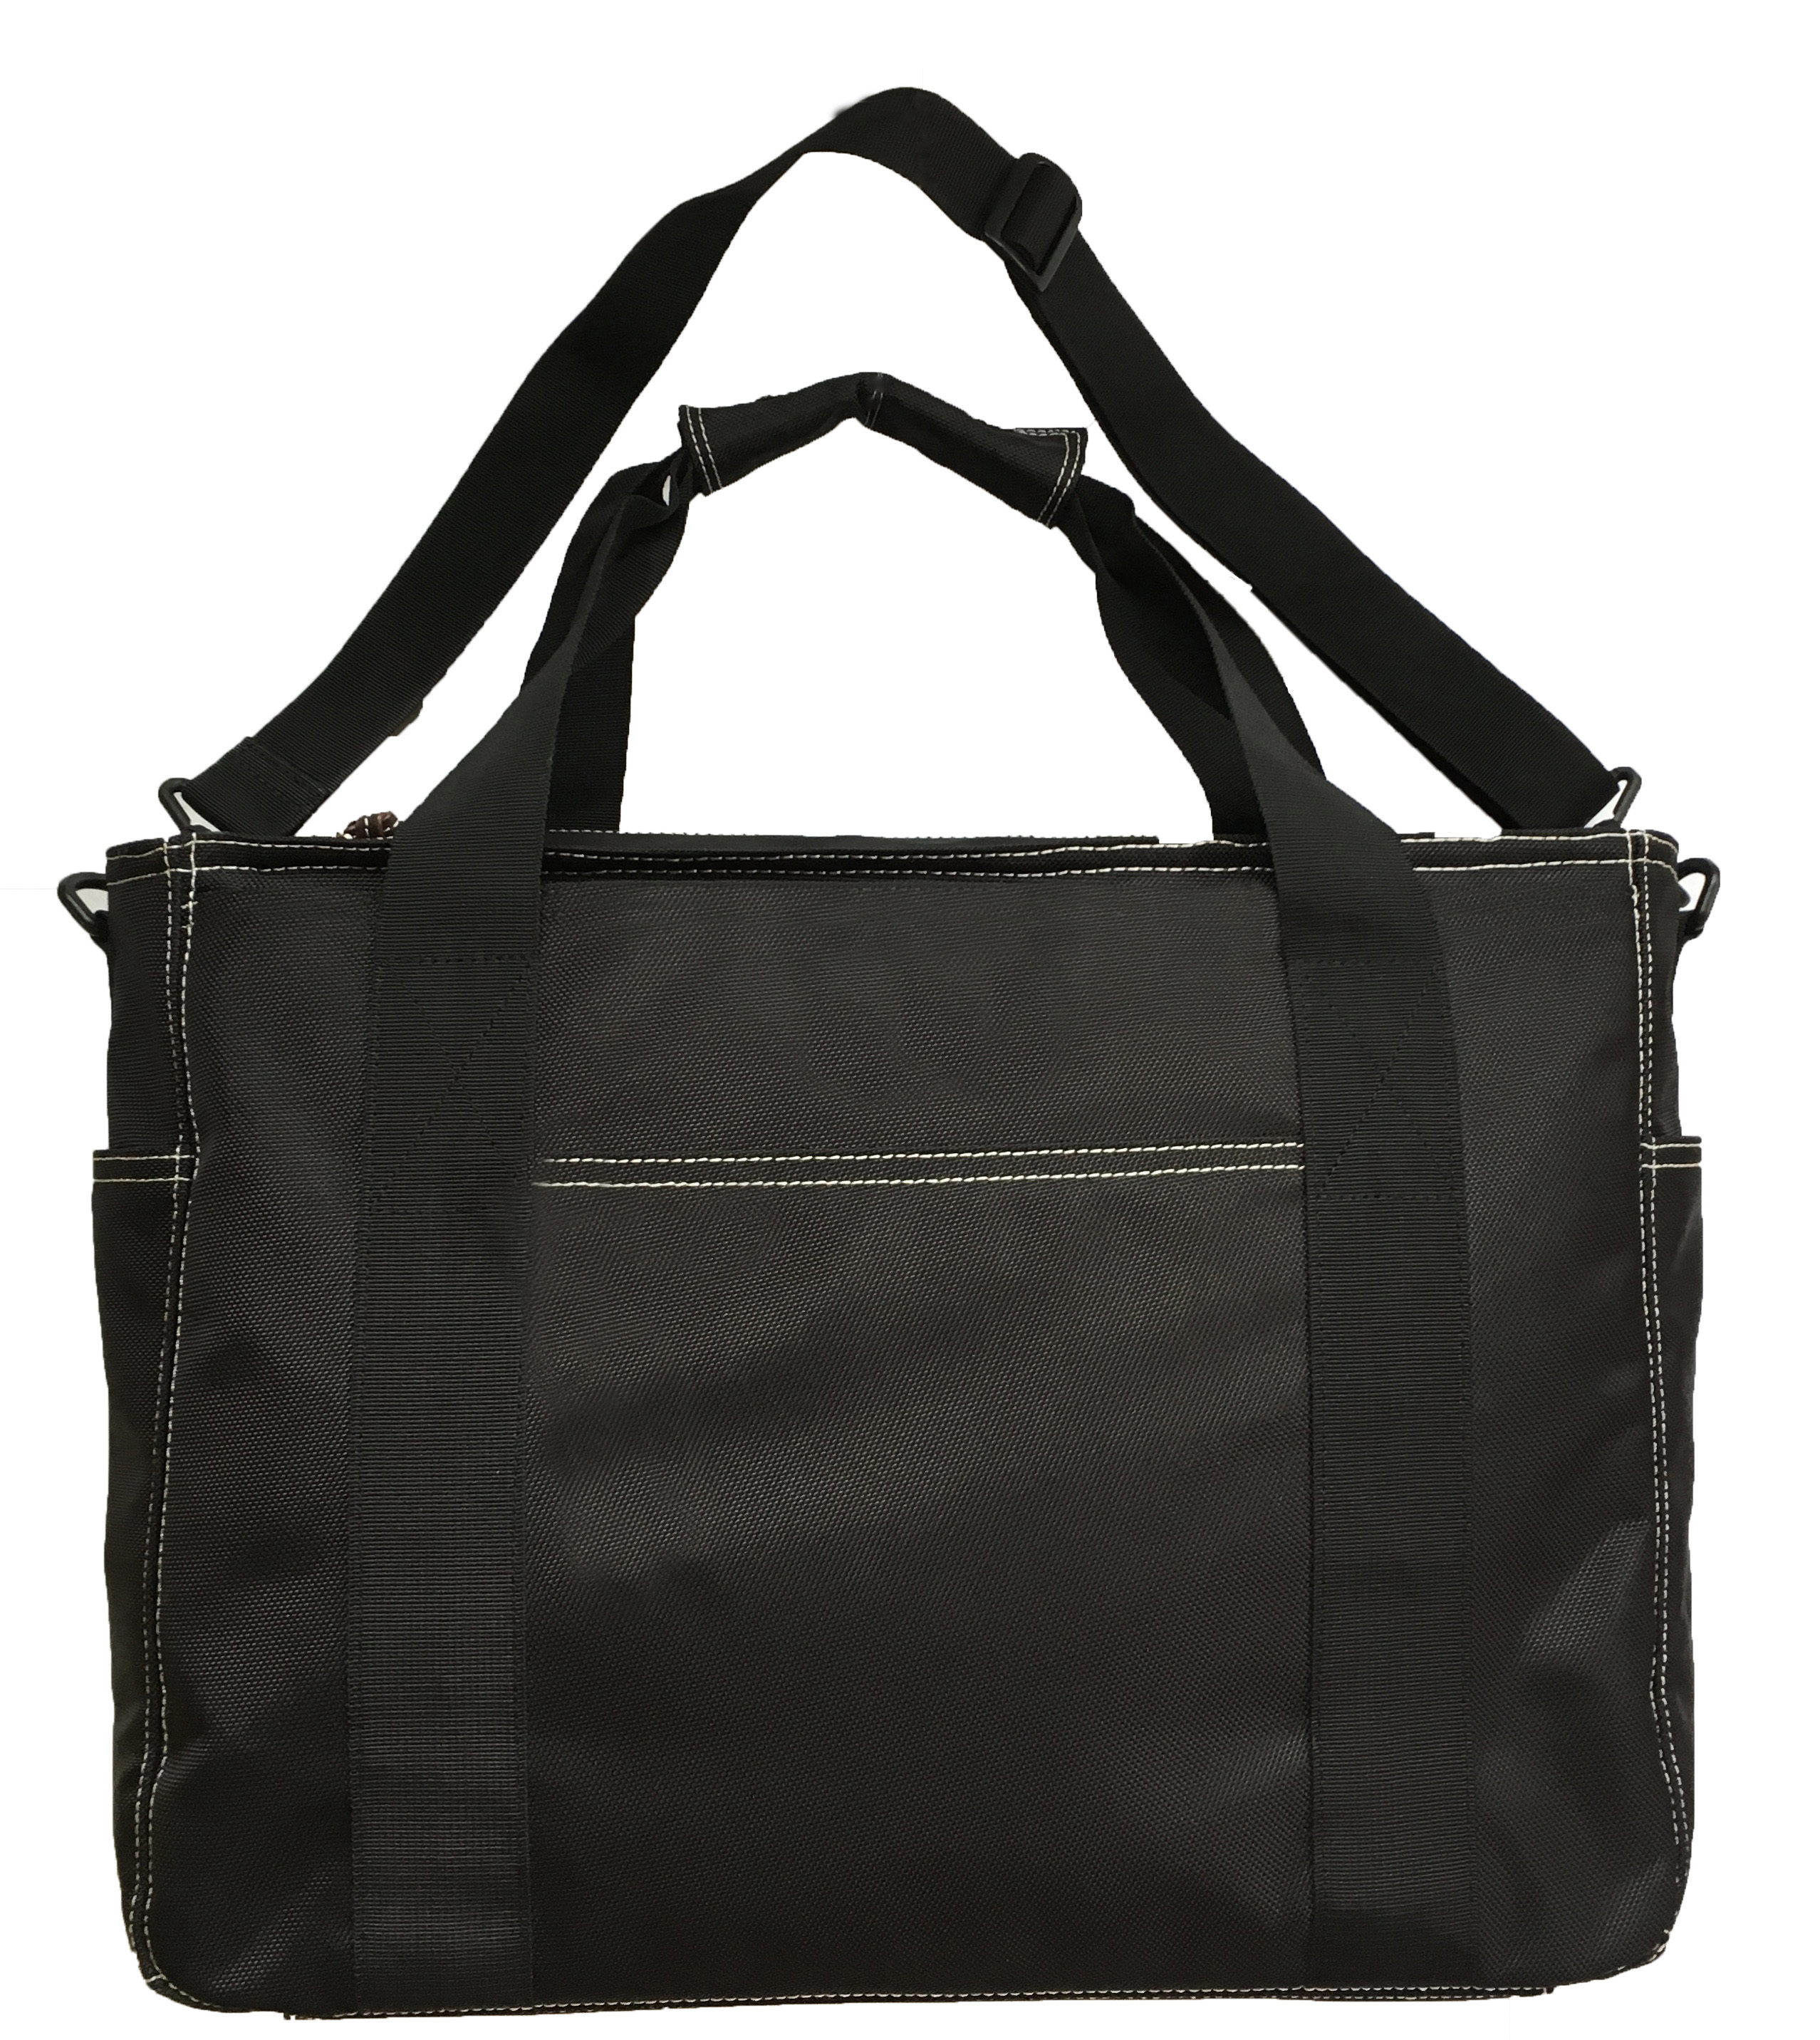 Maggie Mather Sport Tote Pickelball/Tennis Bag (Black)